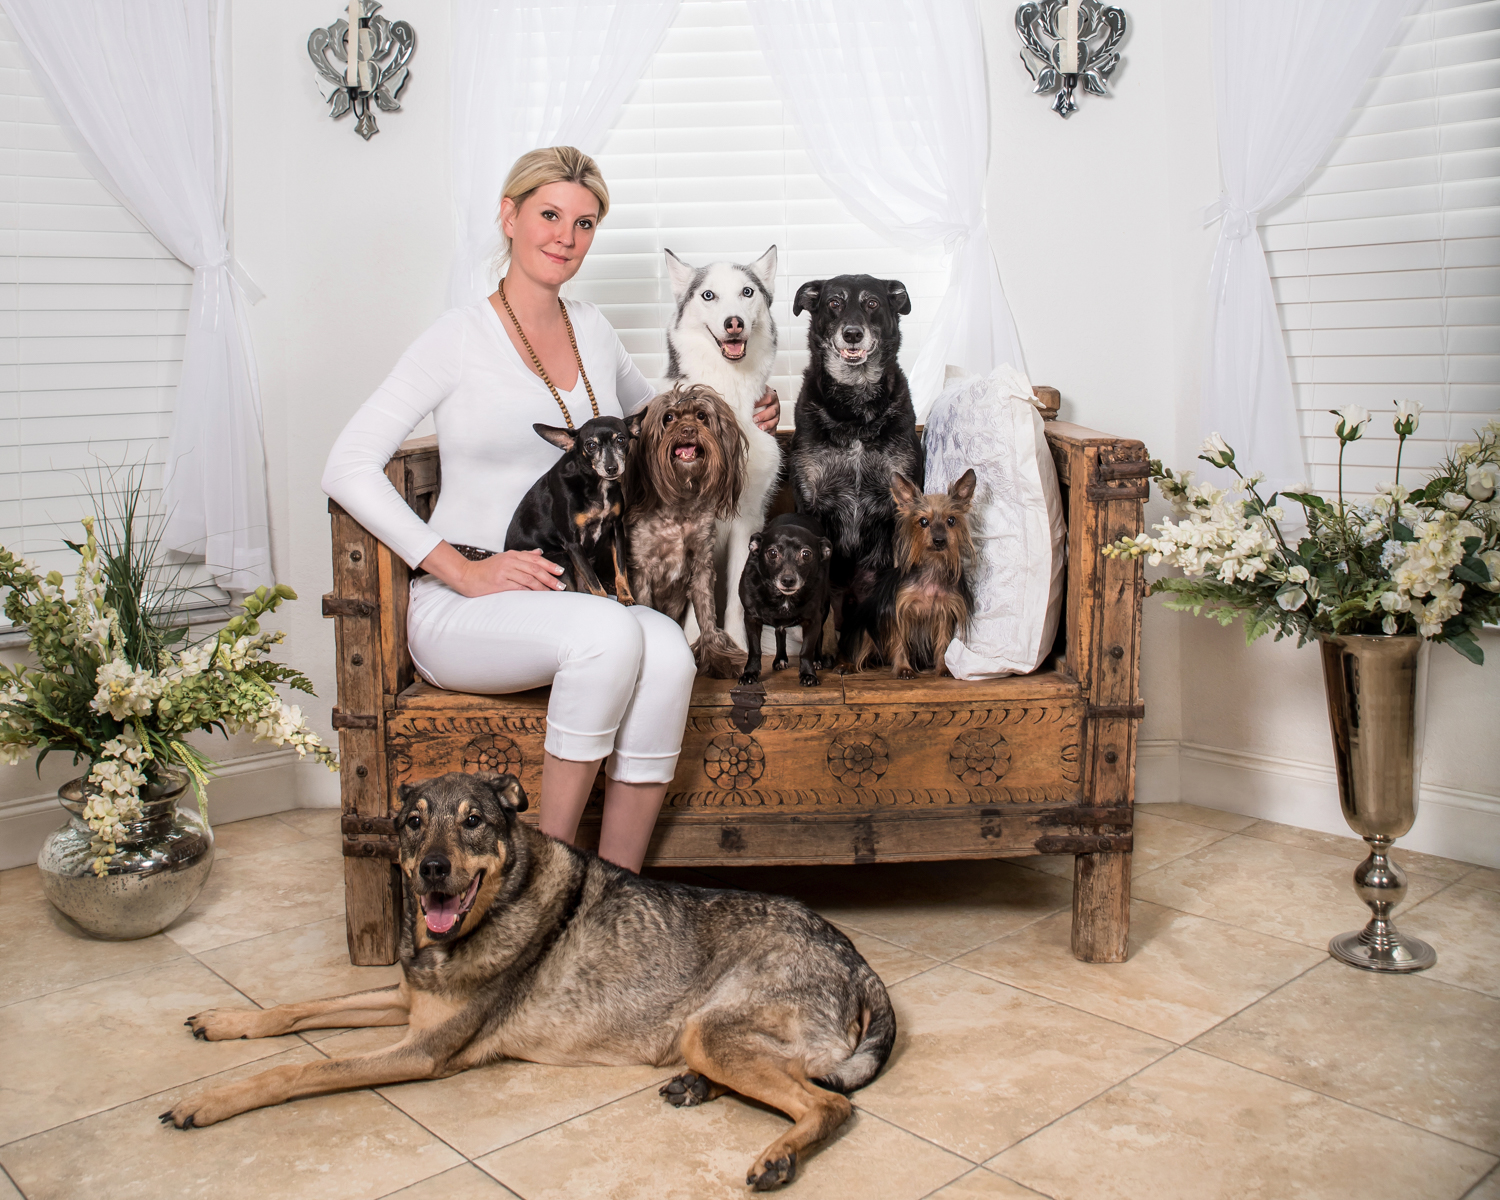 Pet owner and dogs photographer Palm Beach Gardens, FL